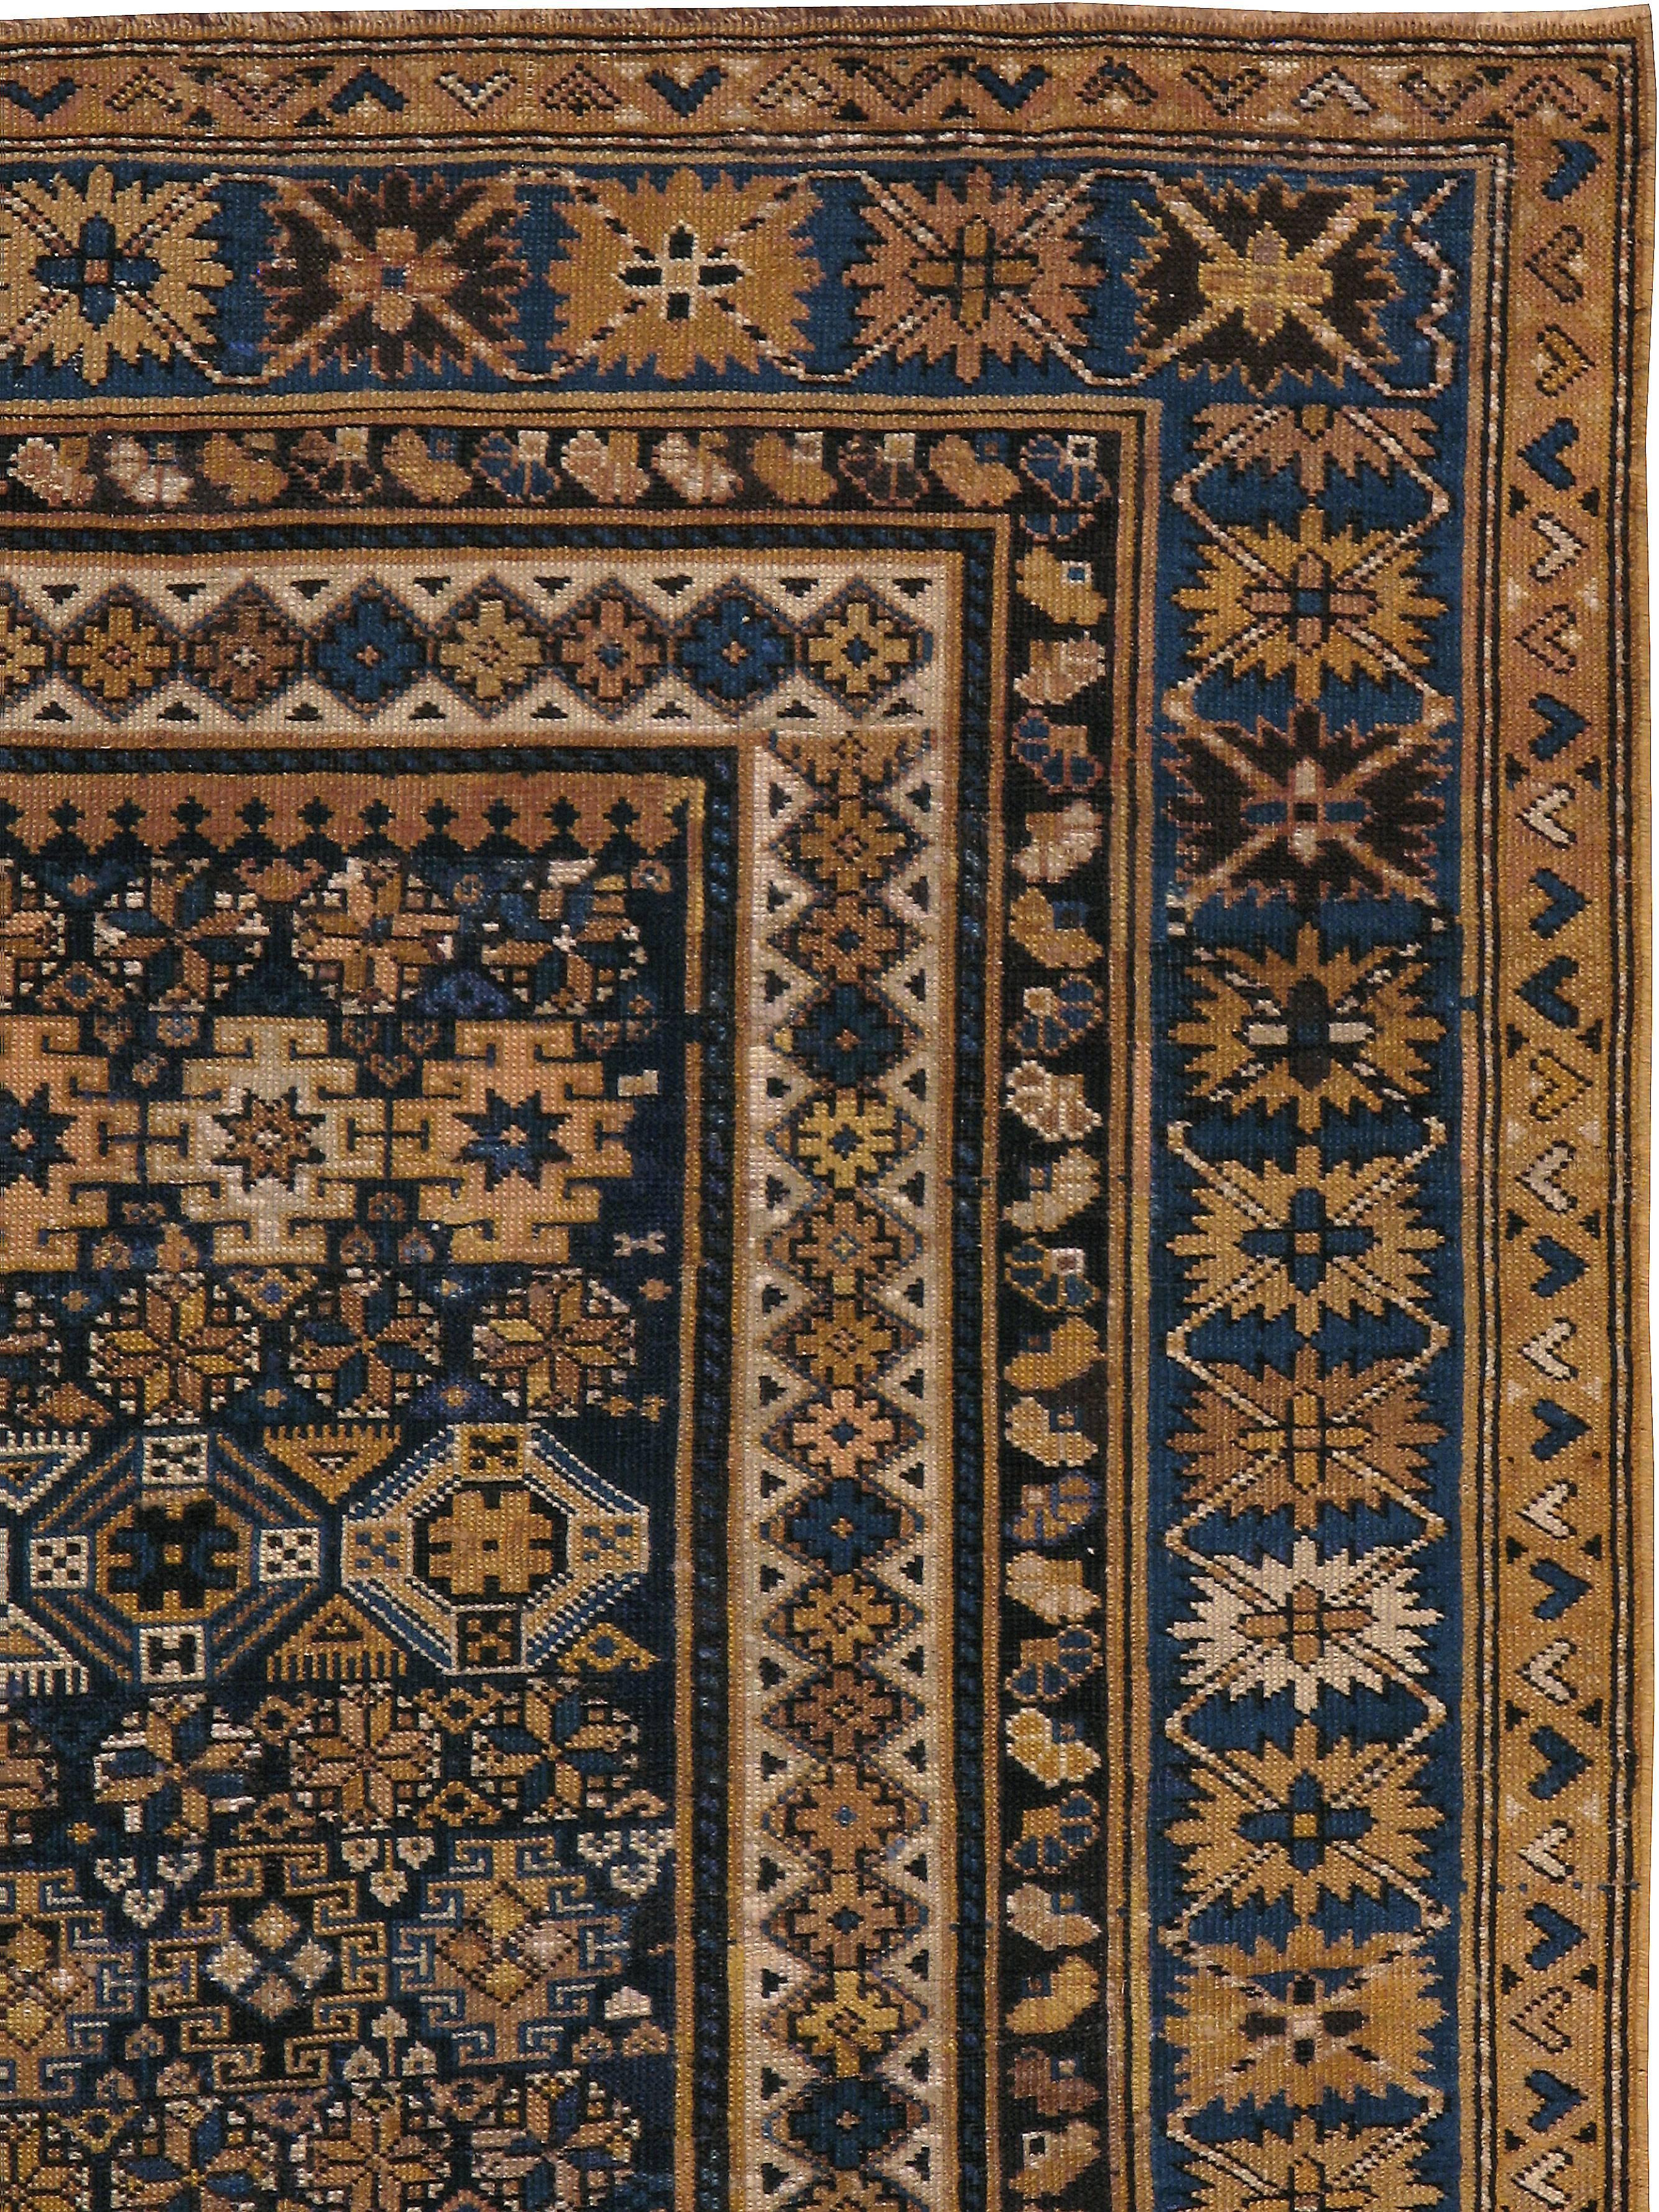 An antique Caucasian carpet from the turn of the 20th century.